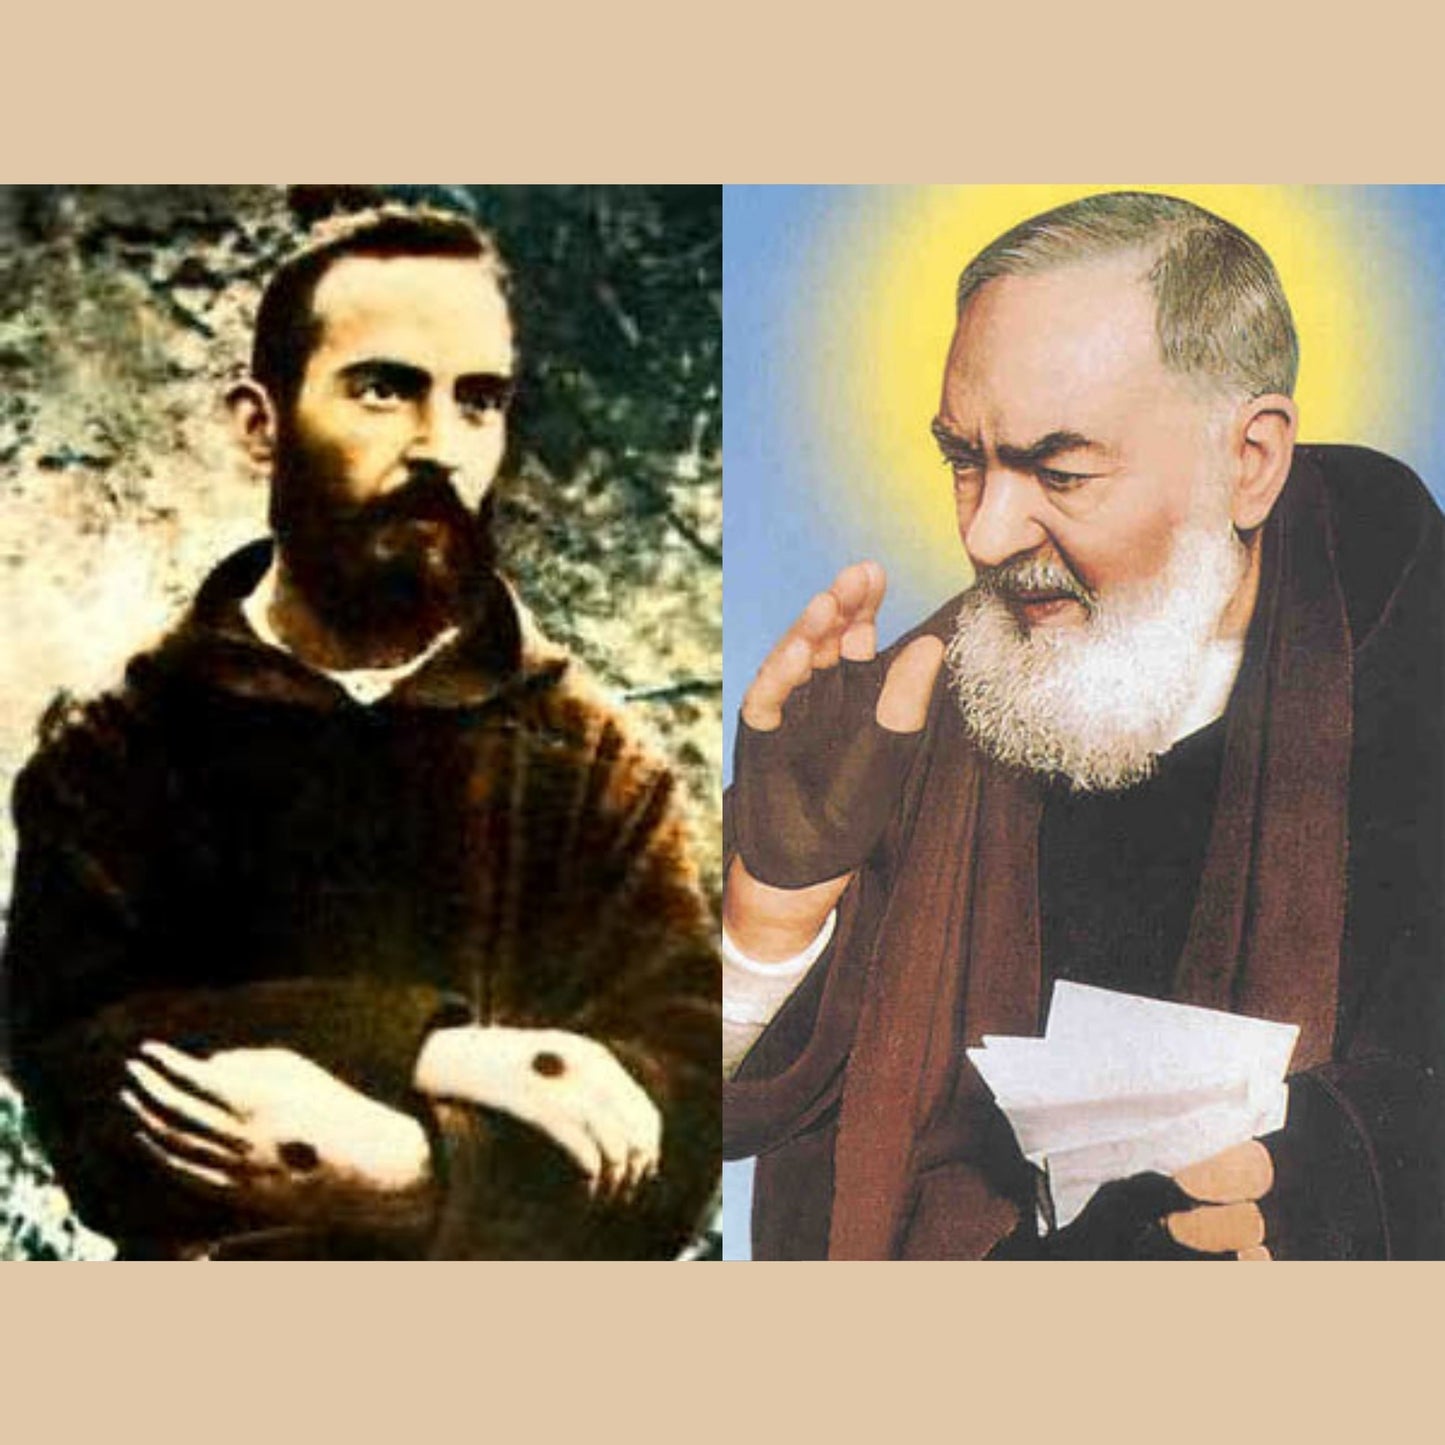 Saint Padre Pio Video Download MP4 - Bob and Penny Lord